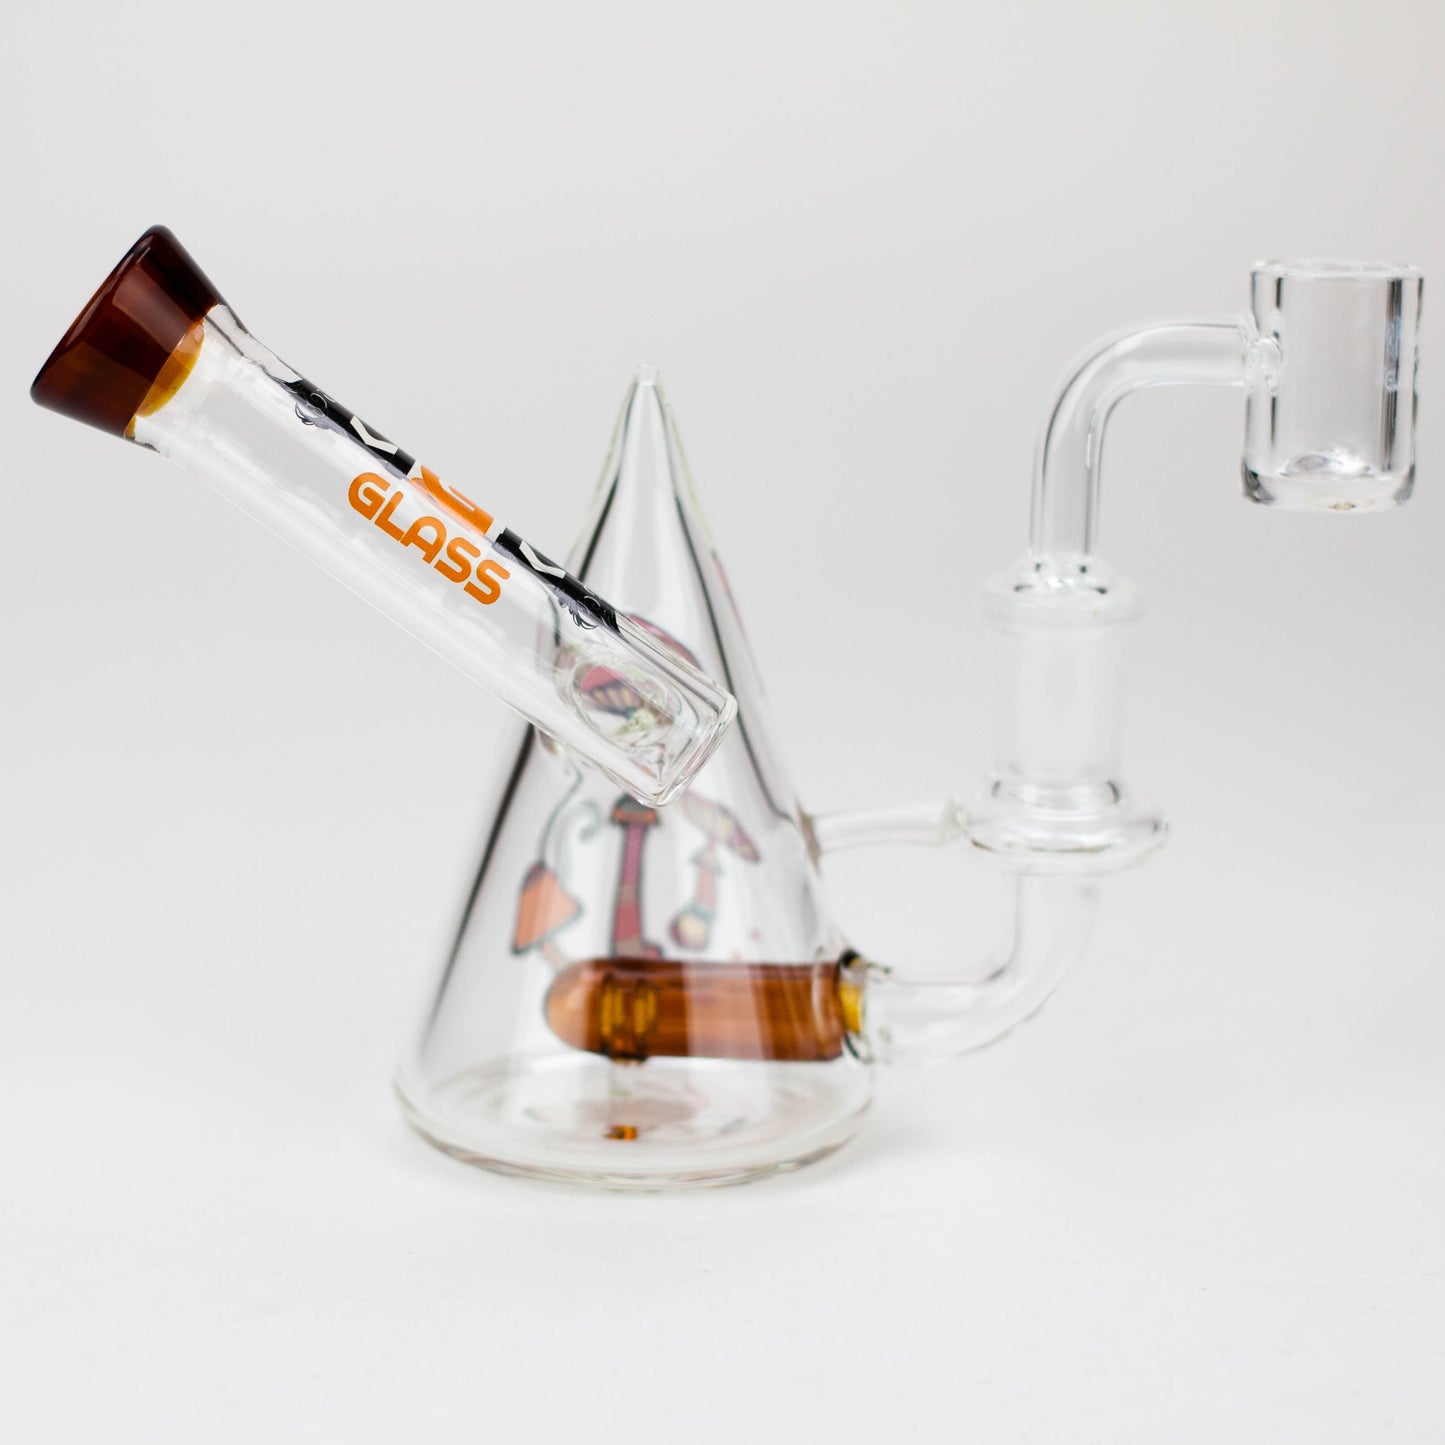 4.5" MGM Glass 2-in-1 bubbler with Graphic [C2672]_1